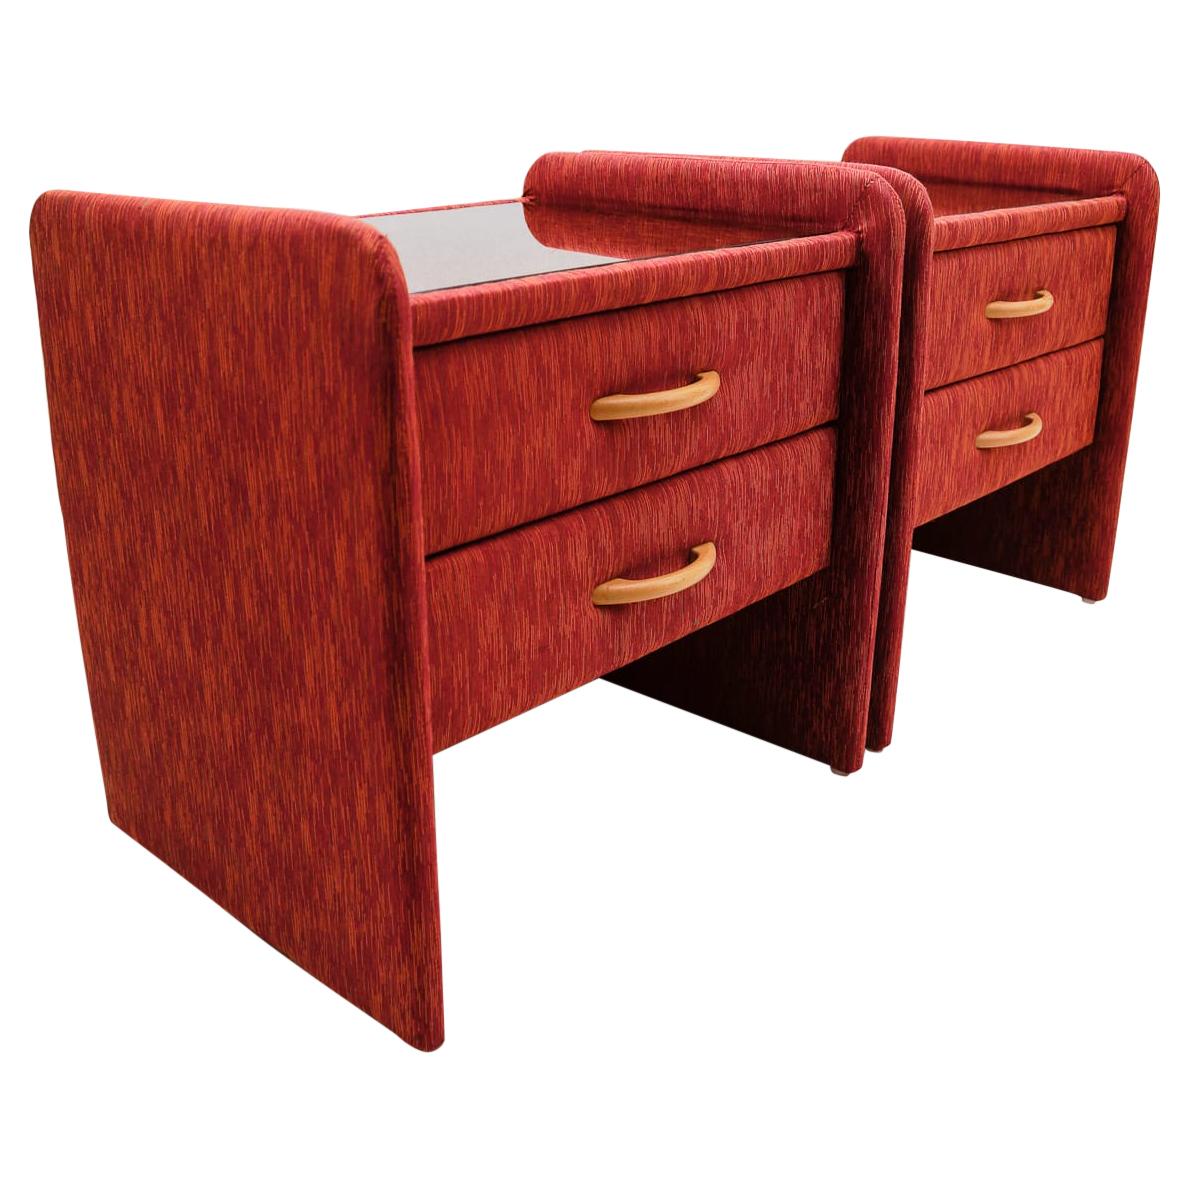 Two Fabric Upholstered Bedside Cabinets in Light Cherry Red and Glass, 1980s For Sale